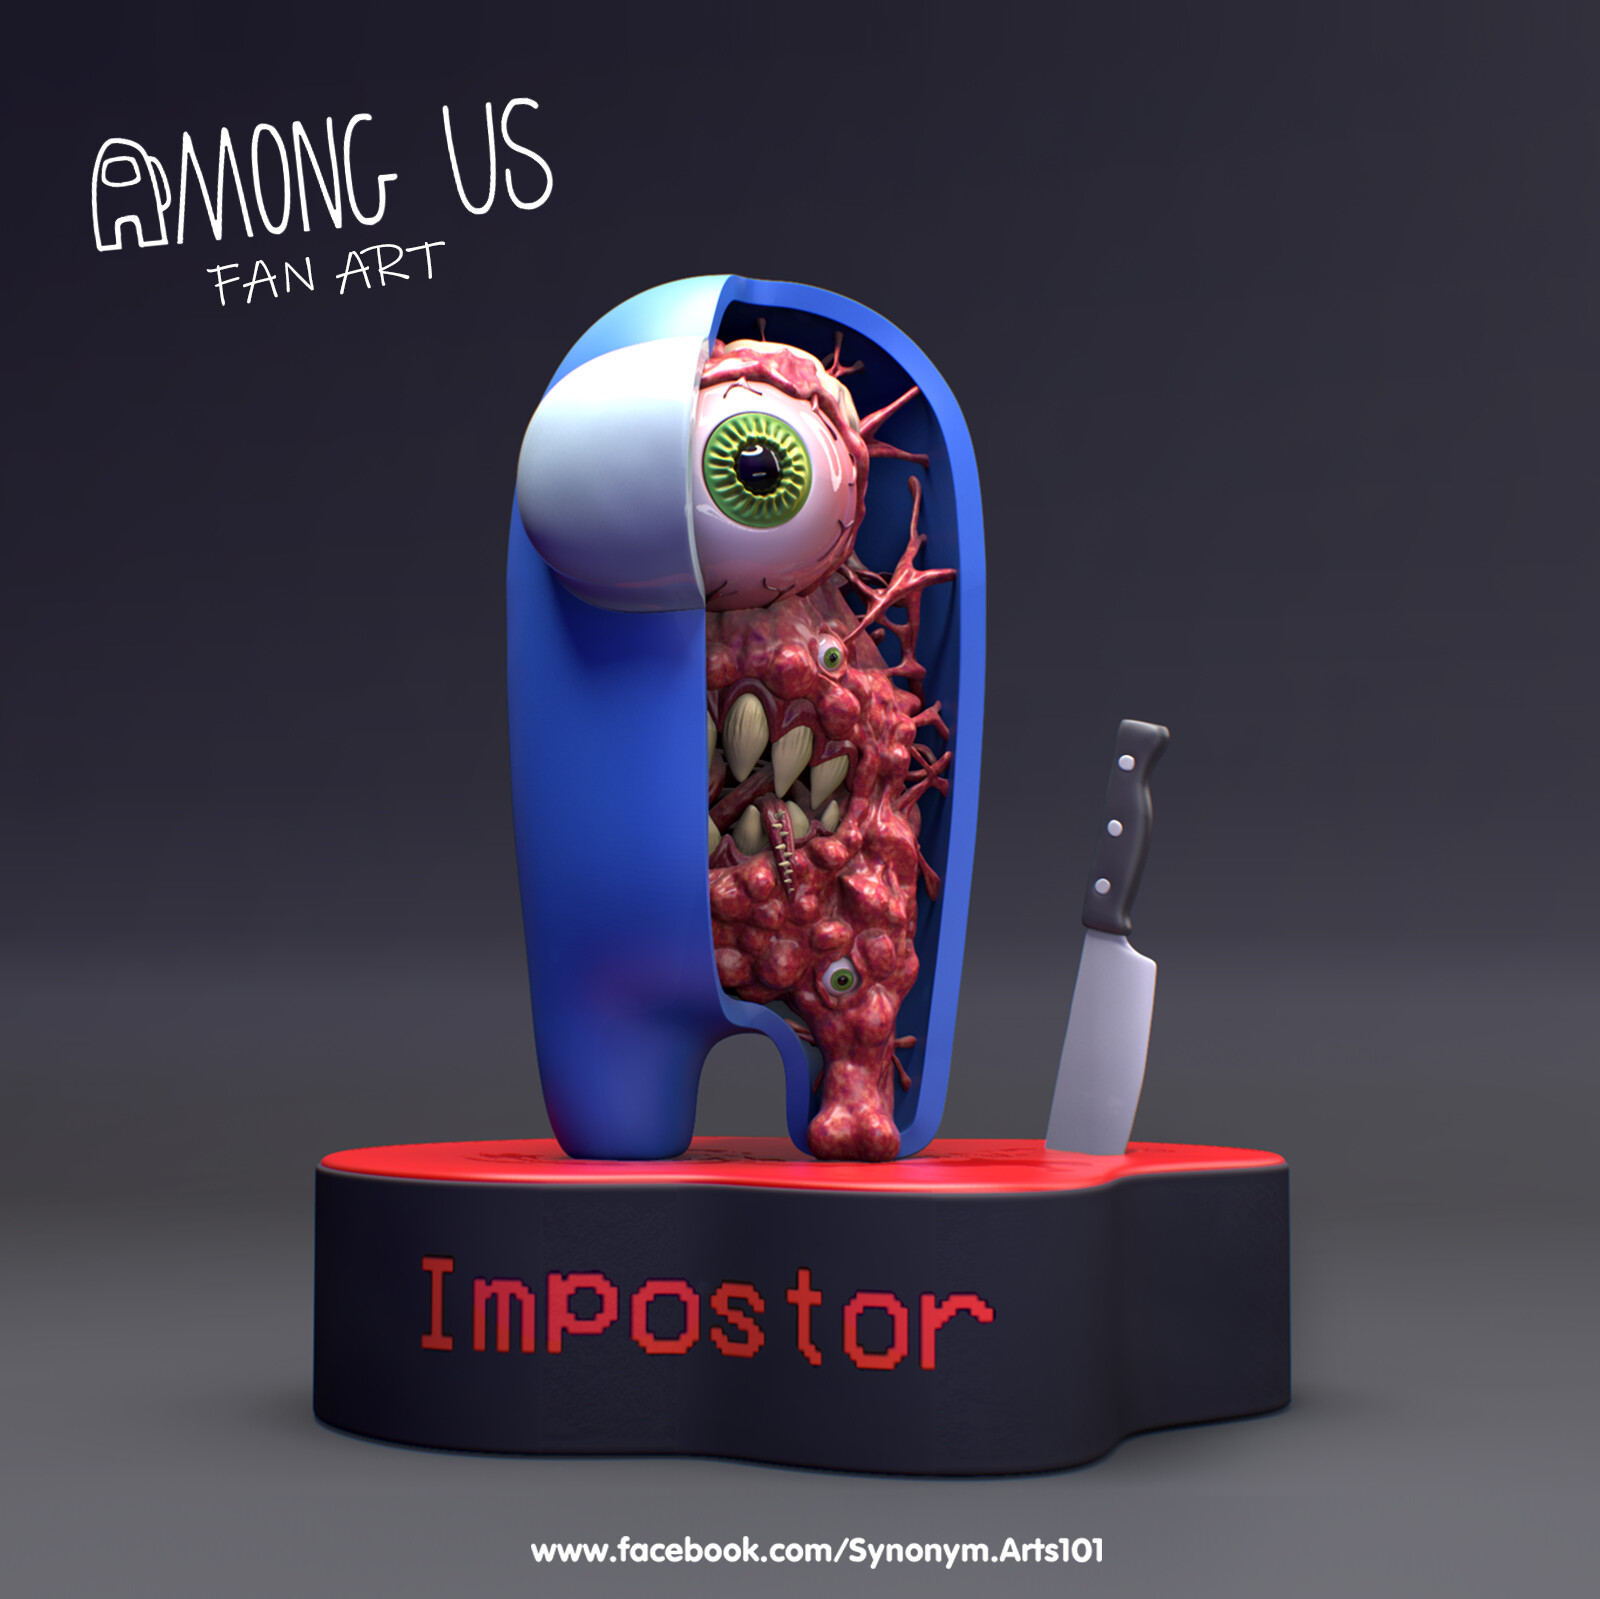 The Impostor is Among Us, Character Concept.